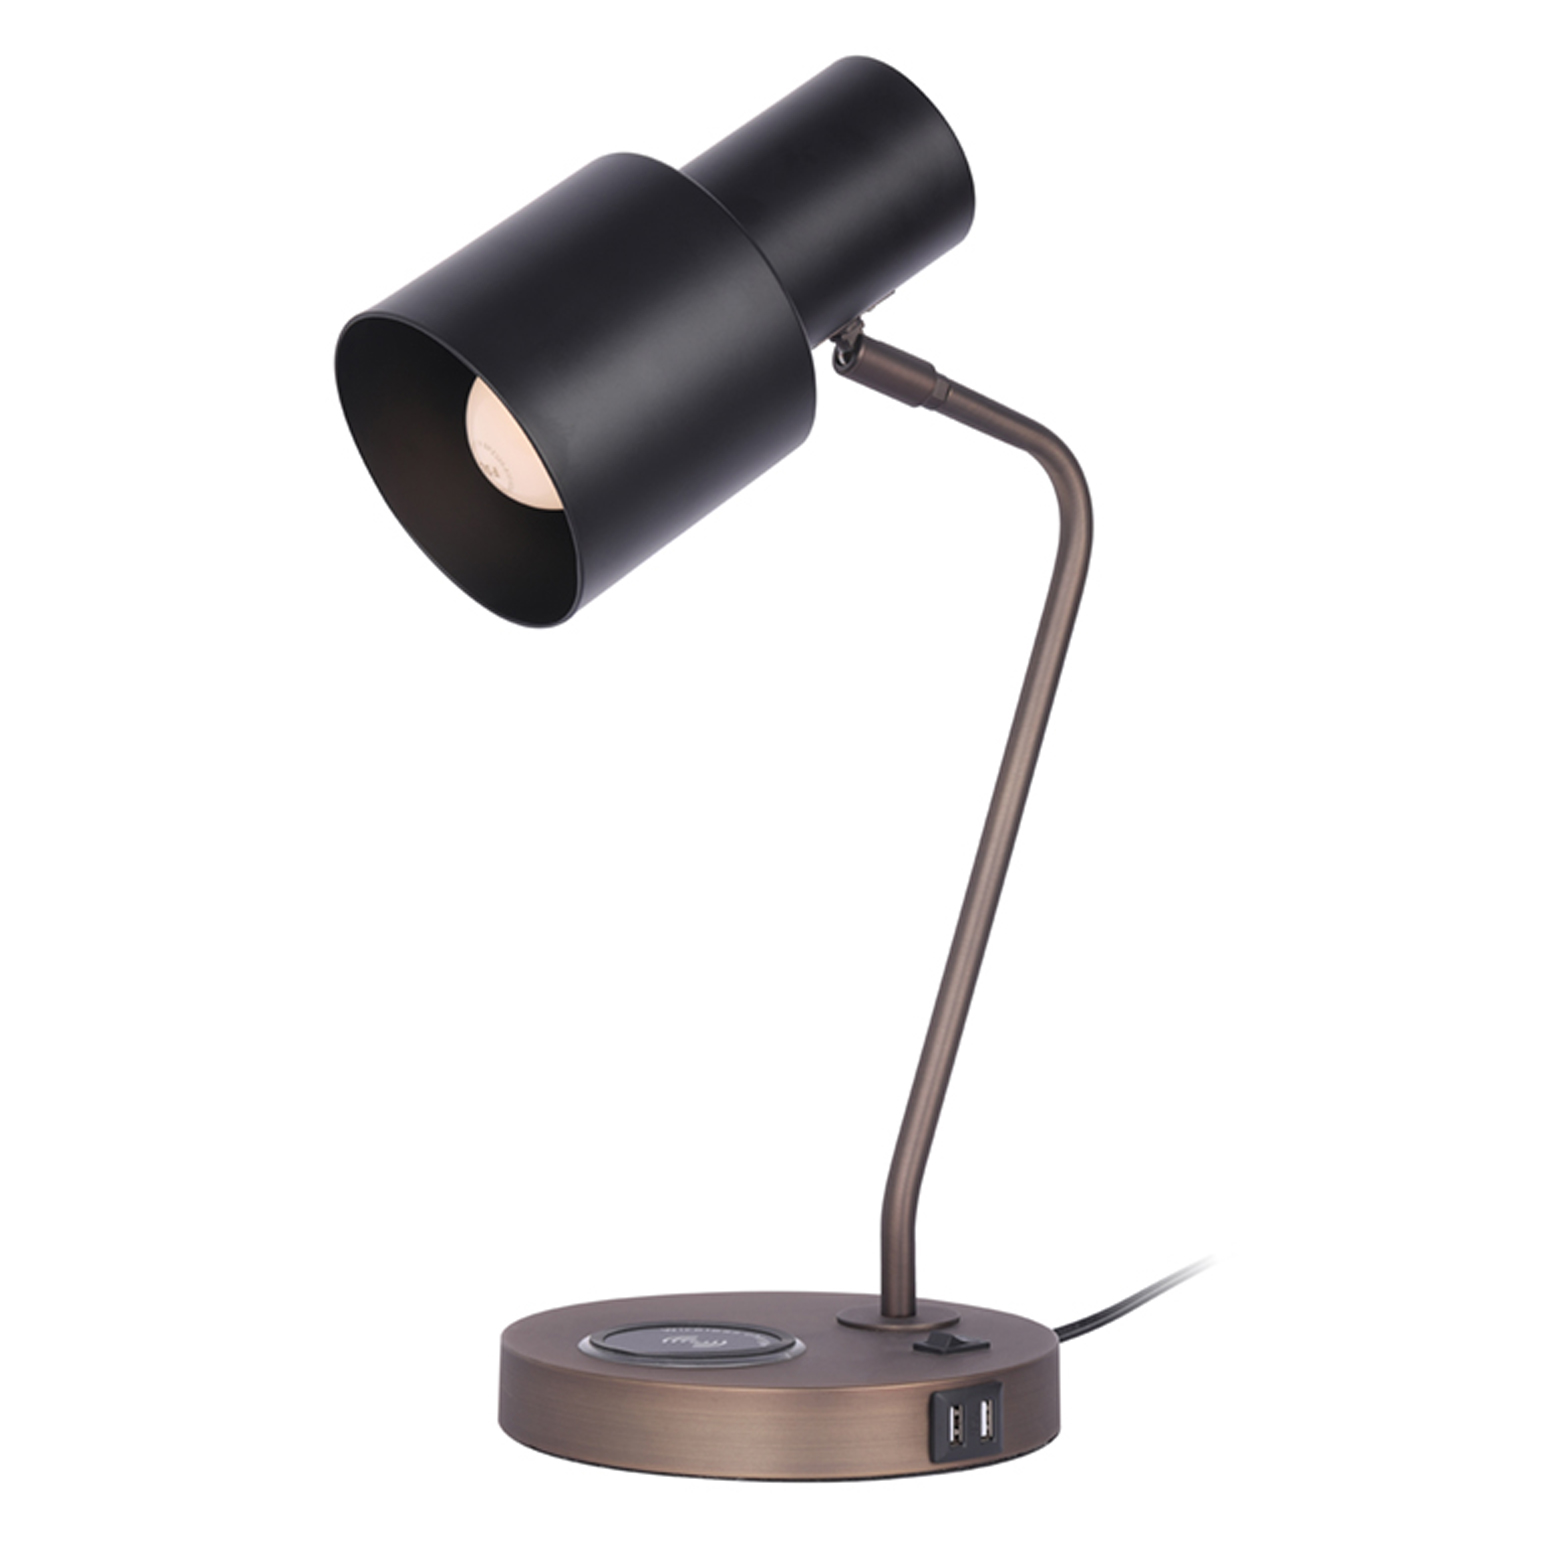 E27 traditional design table lamp wireless charging for phone desk lamp with USB Charging Port Featured Image